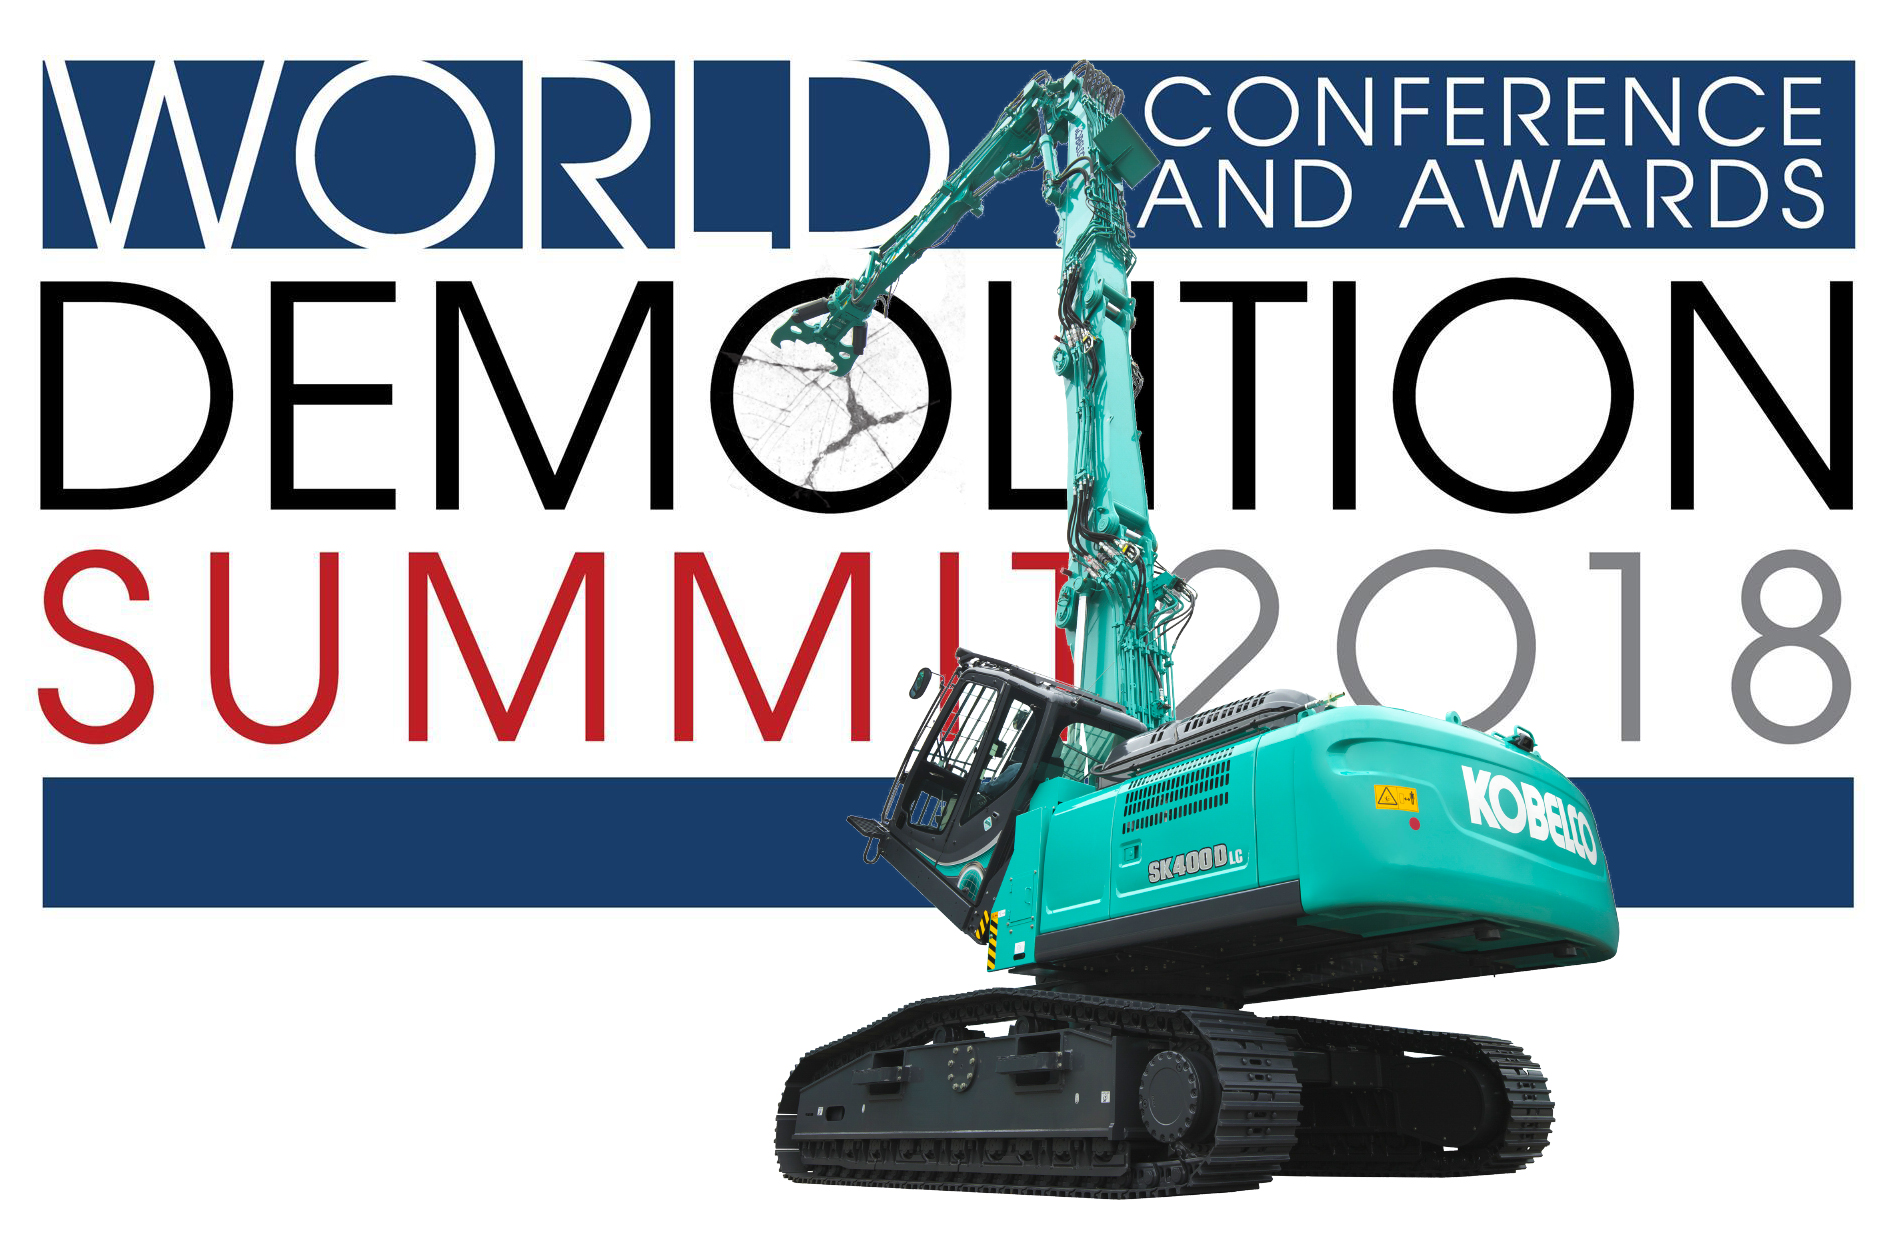 Kobelco attending World Demolition Summit as a Bronze Sponsor for the second time